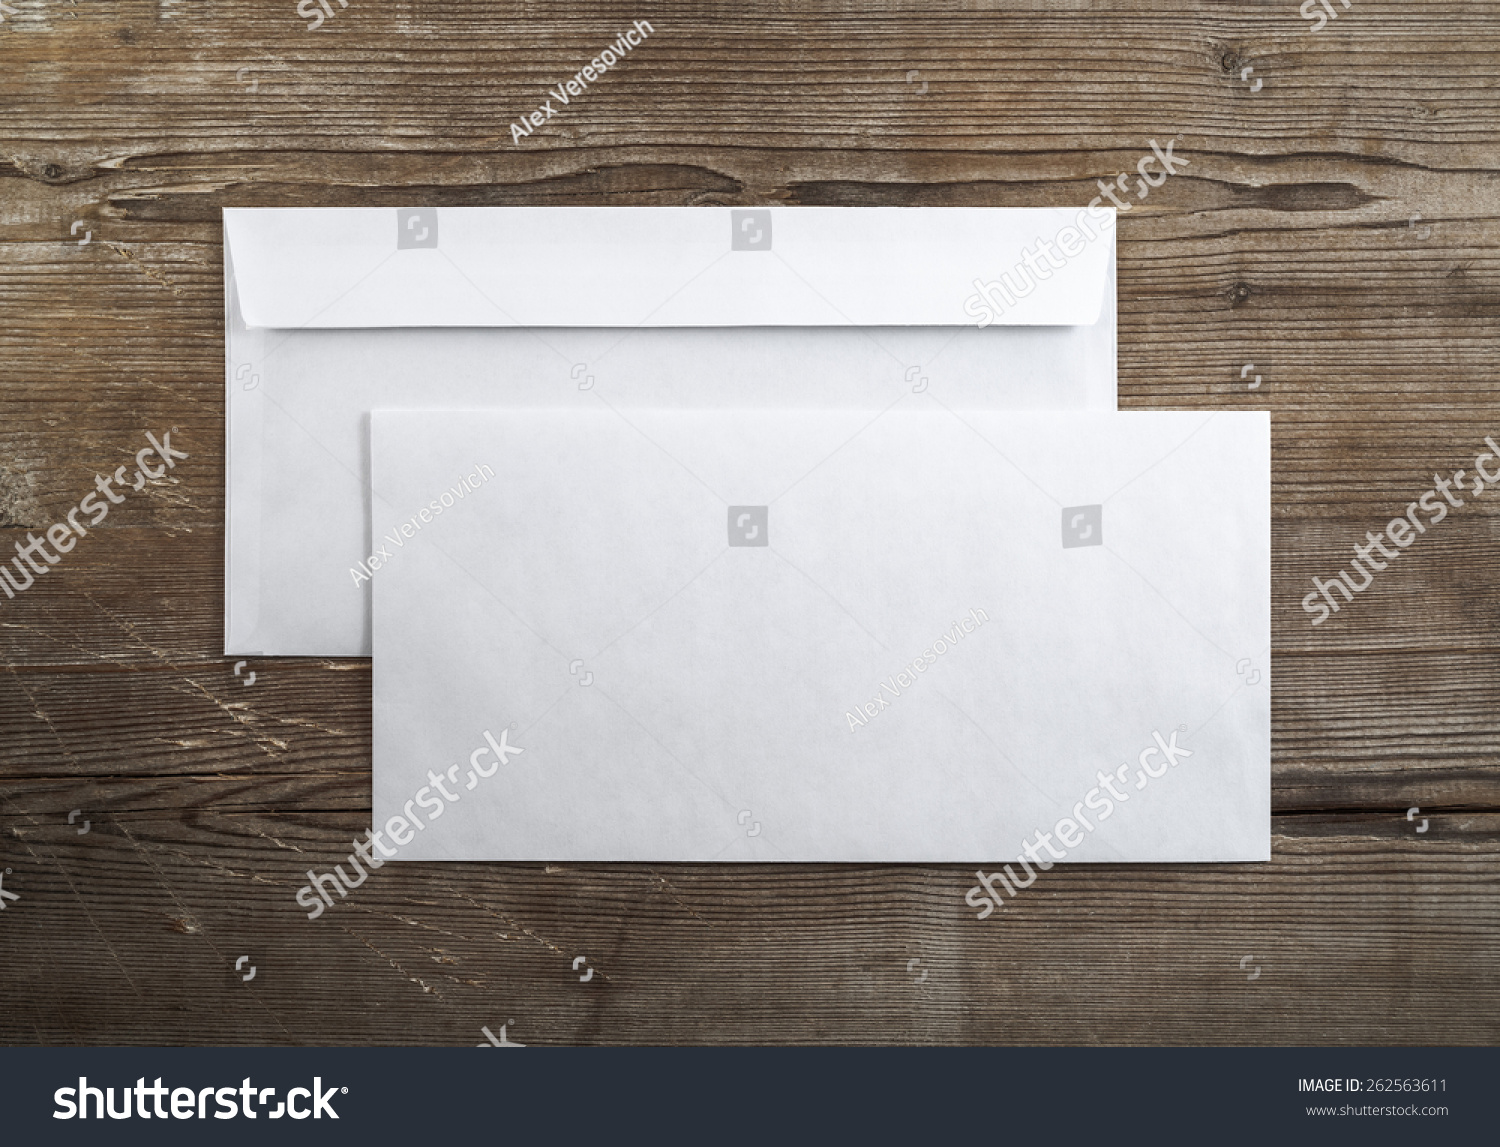 Photo of blank envelopes on a dark wooden background. Back and front. Template for branding identity. Top view. #262563611